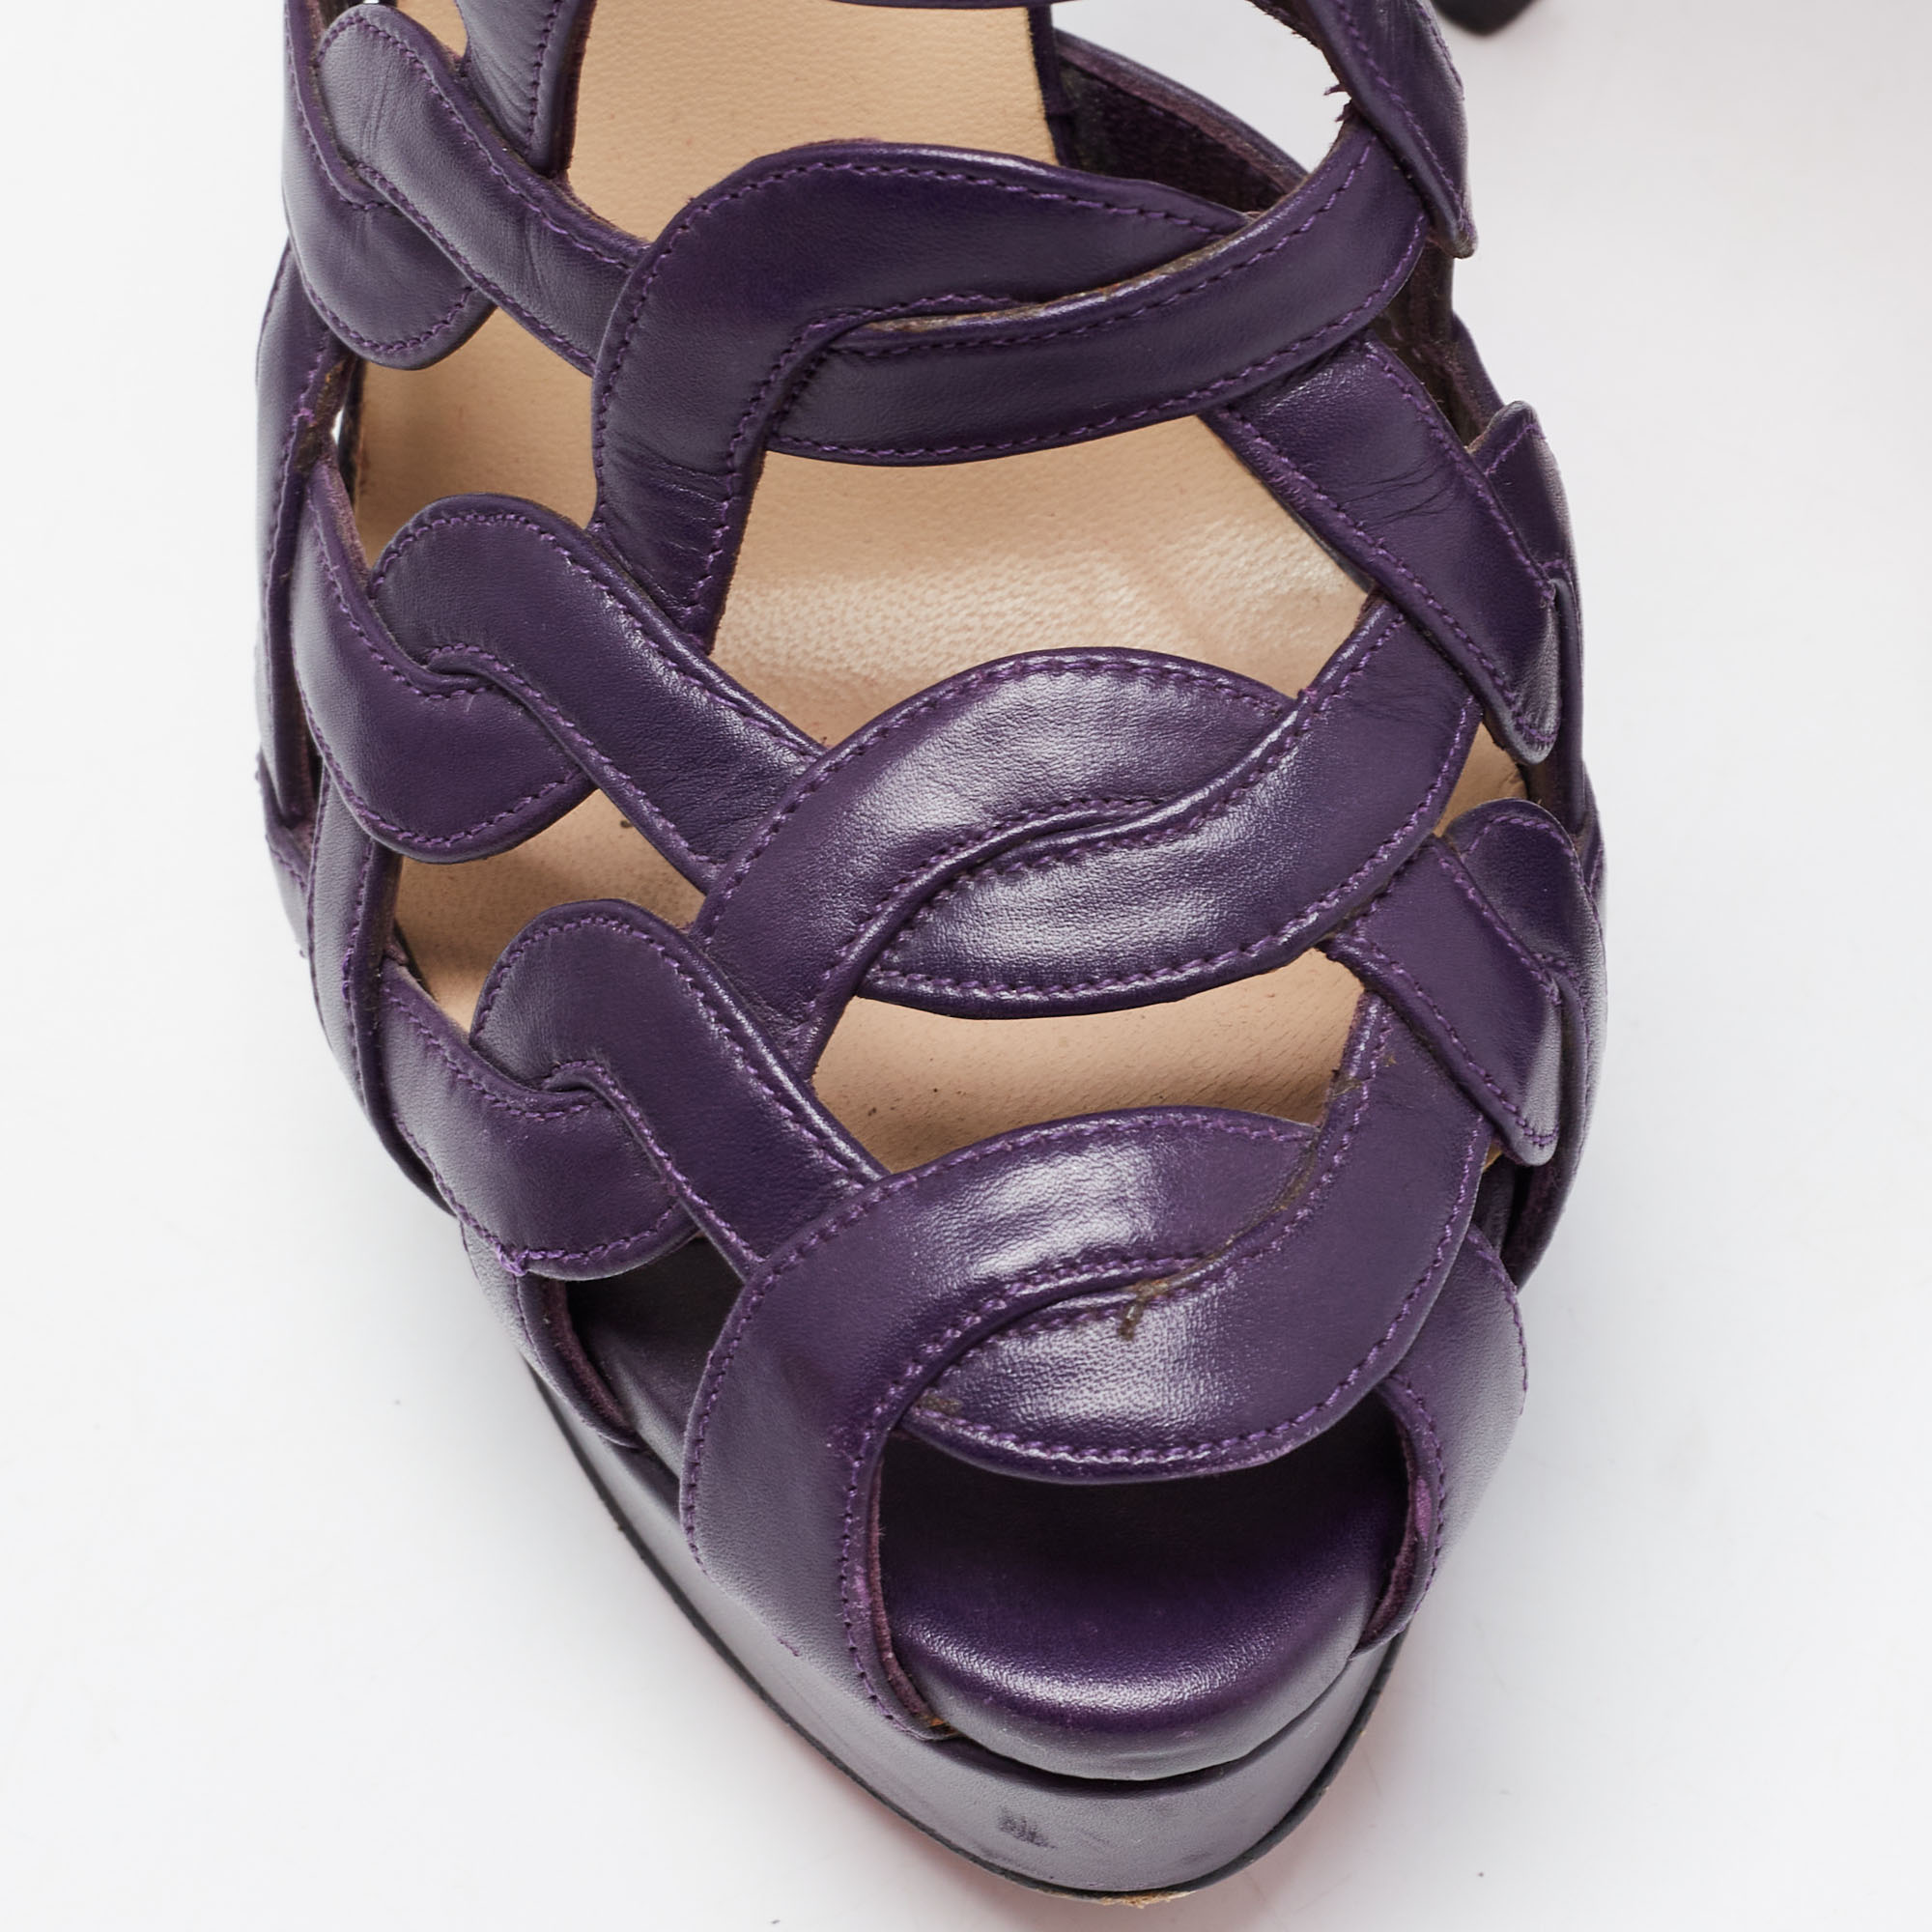 Christian Louboutin Purple Leather Nicole Caged Ankle Strap Sandals Size 36.5